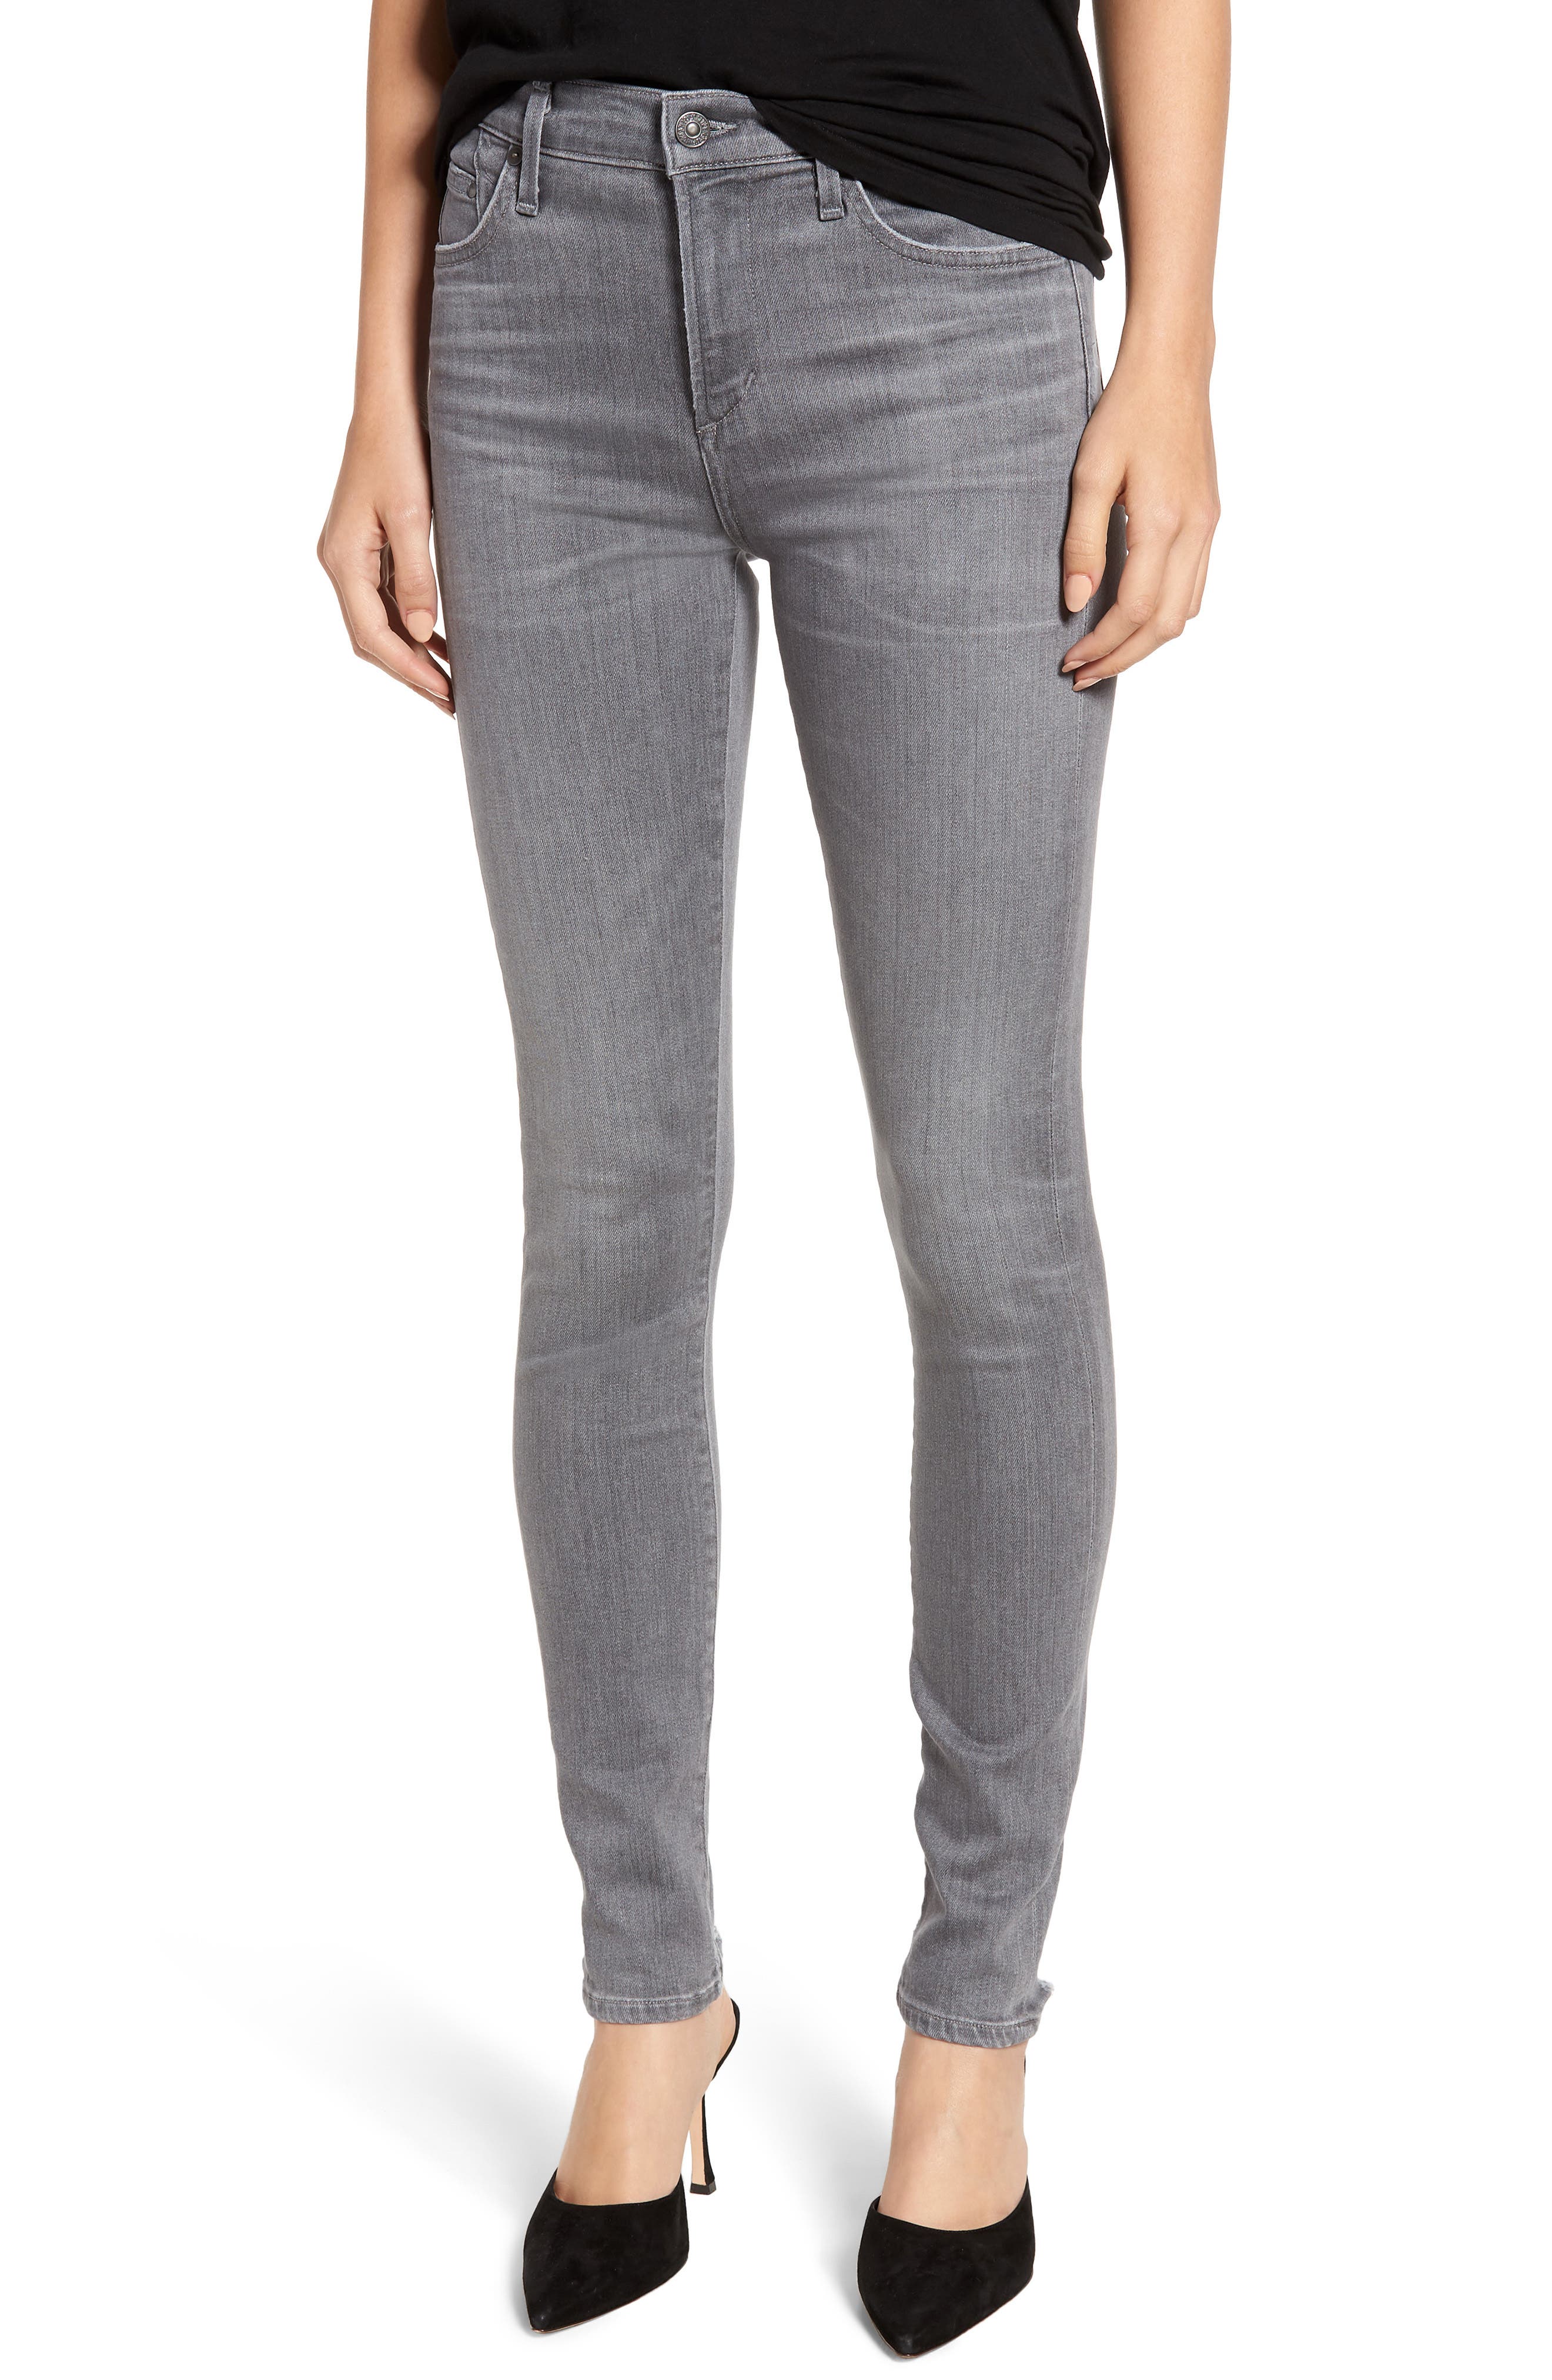 citizens of humanity gray jeans